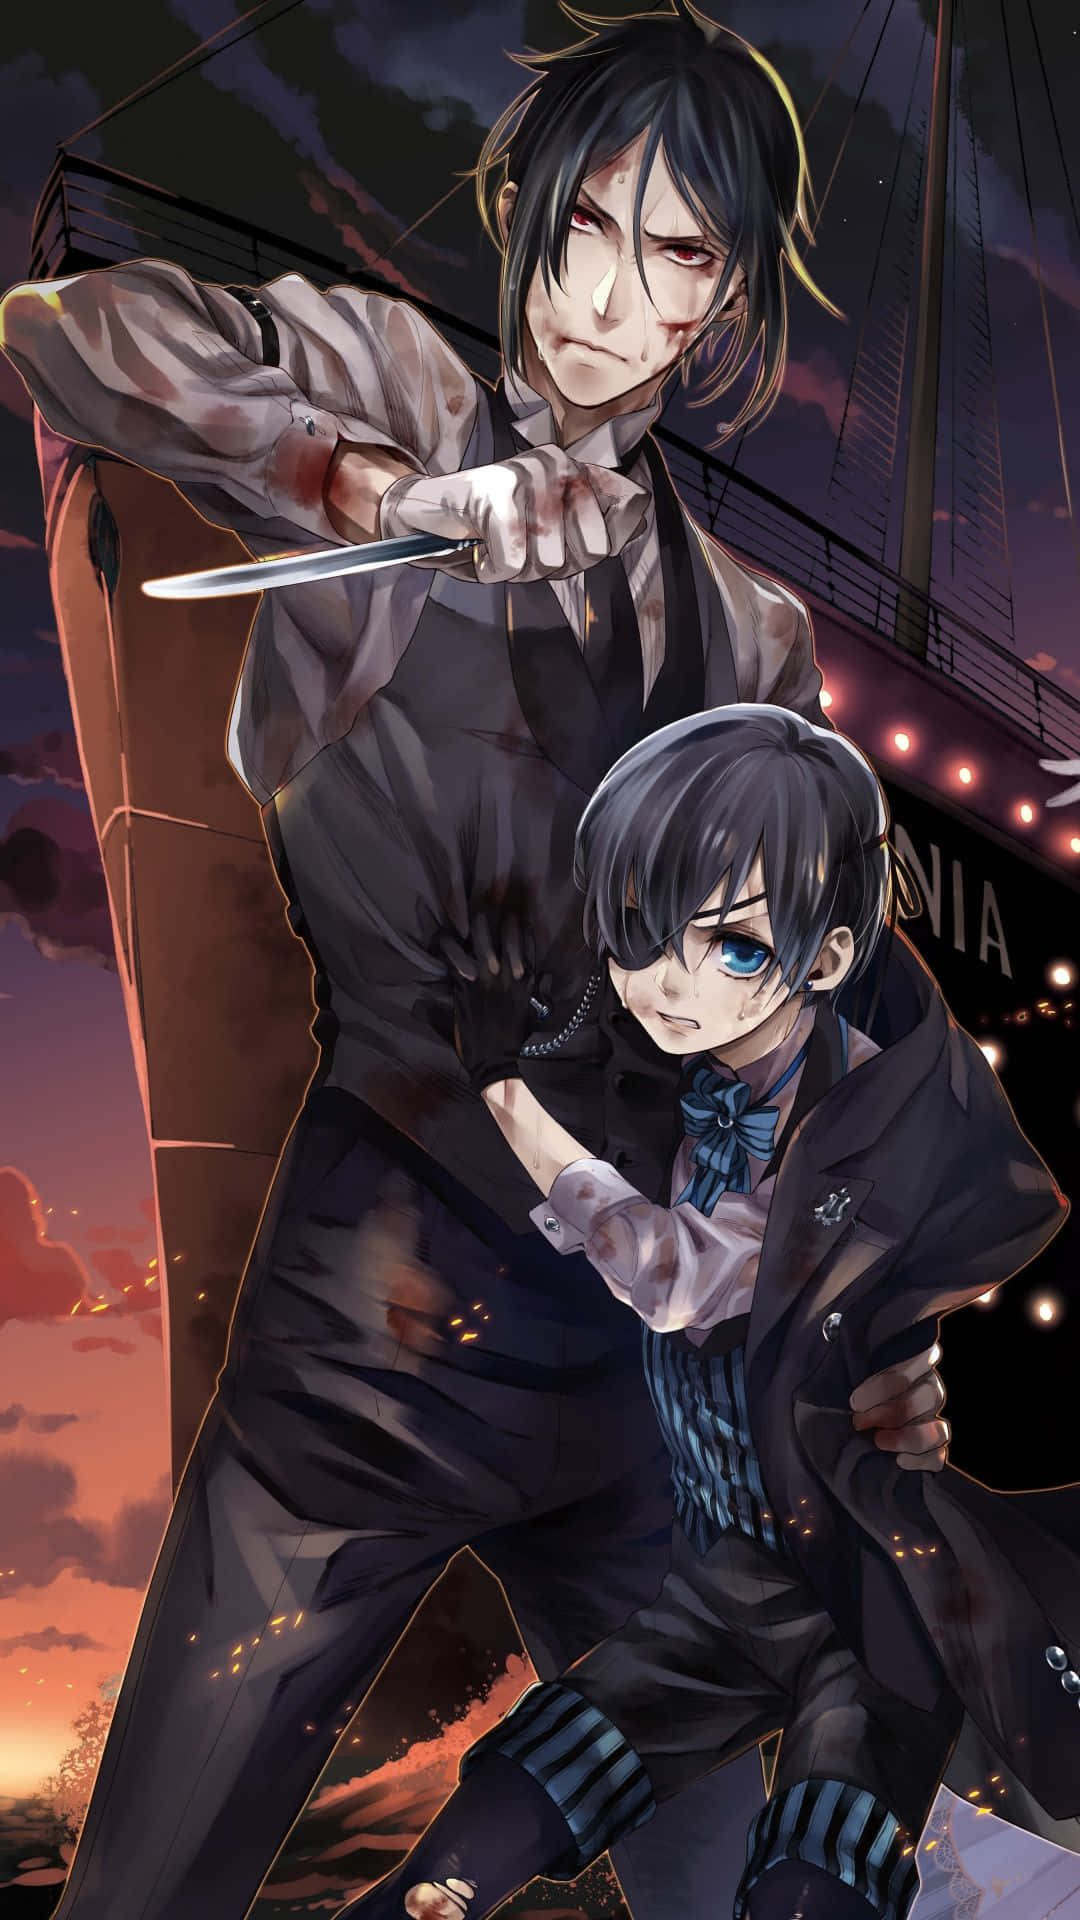 Ciel and Sebastian, the dynamic duo of Black Butler